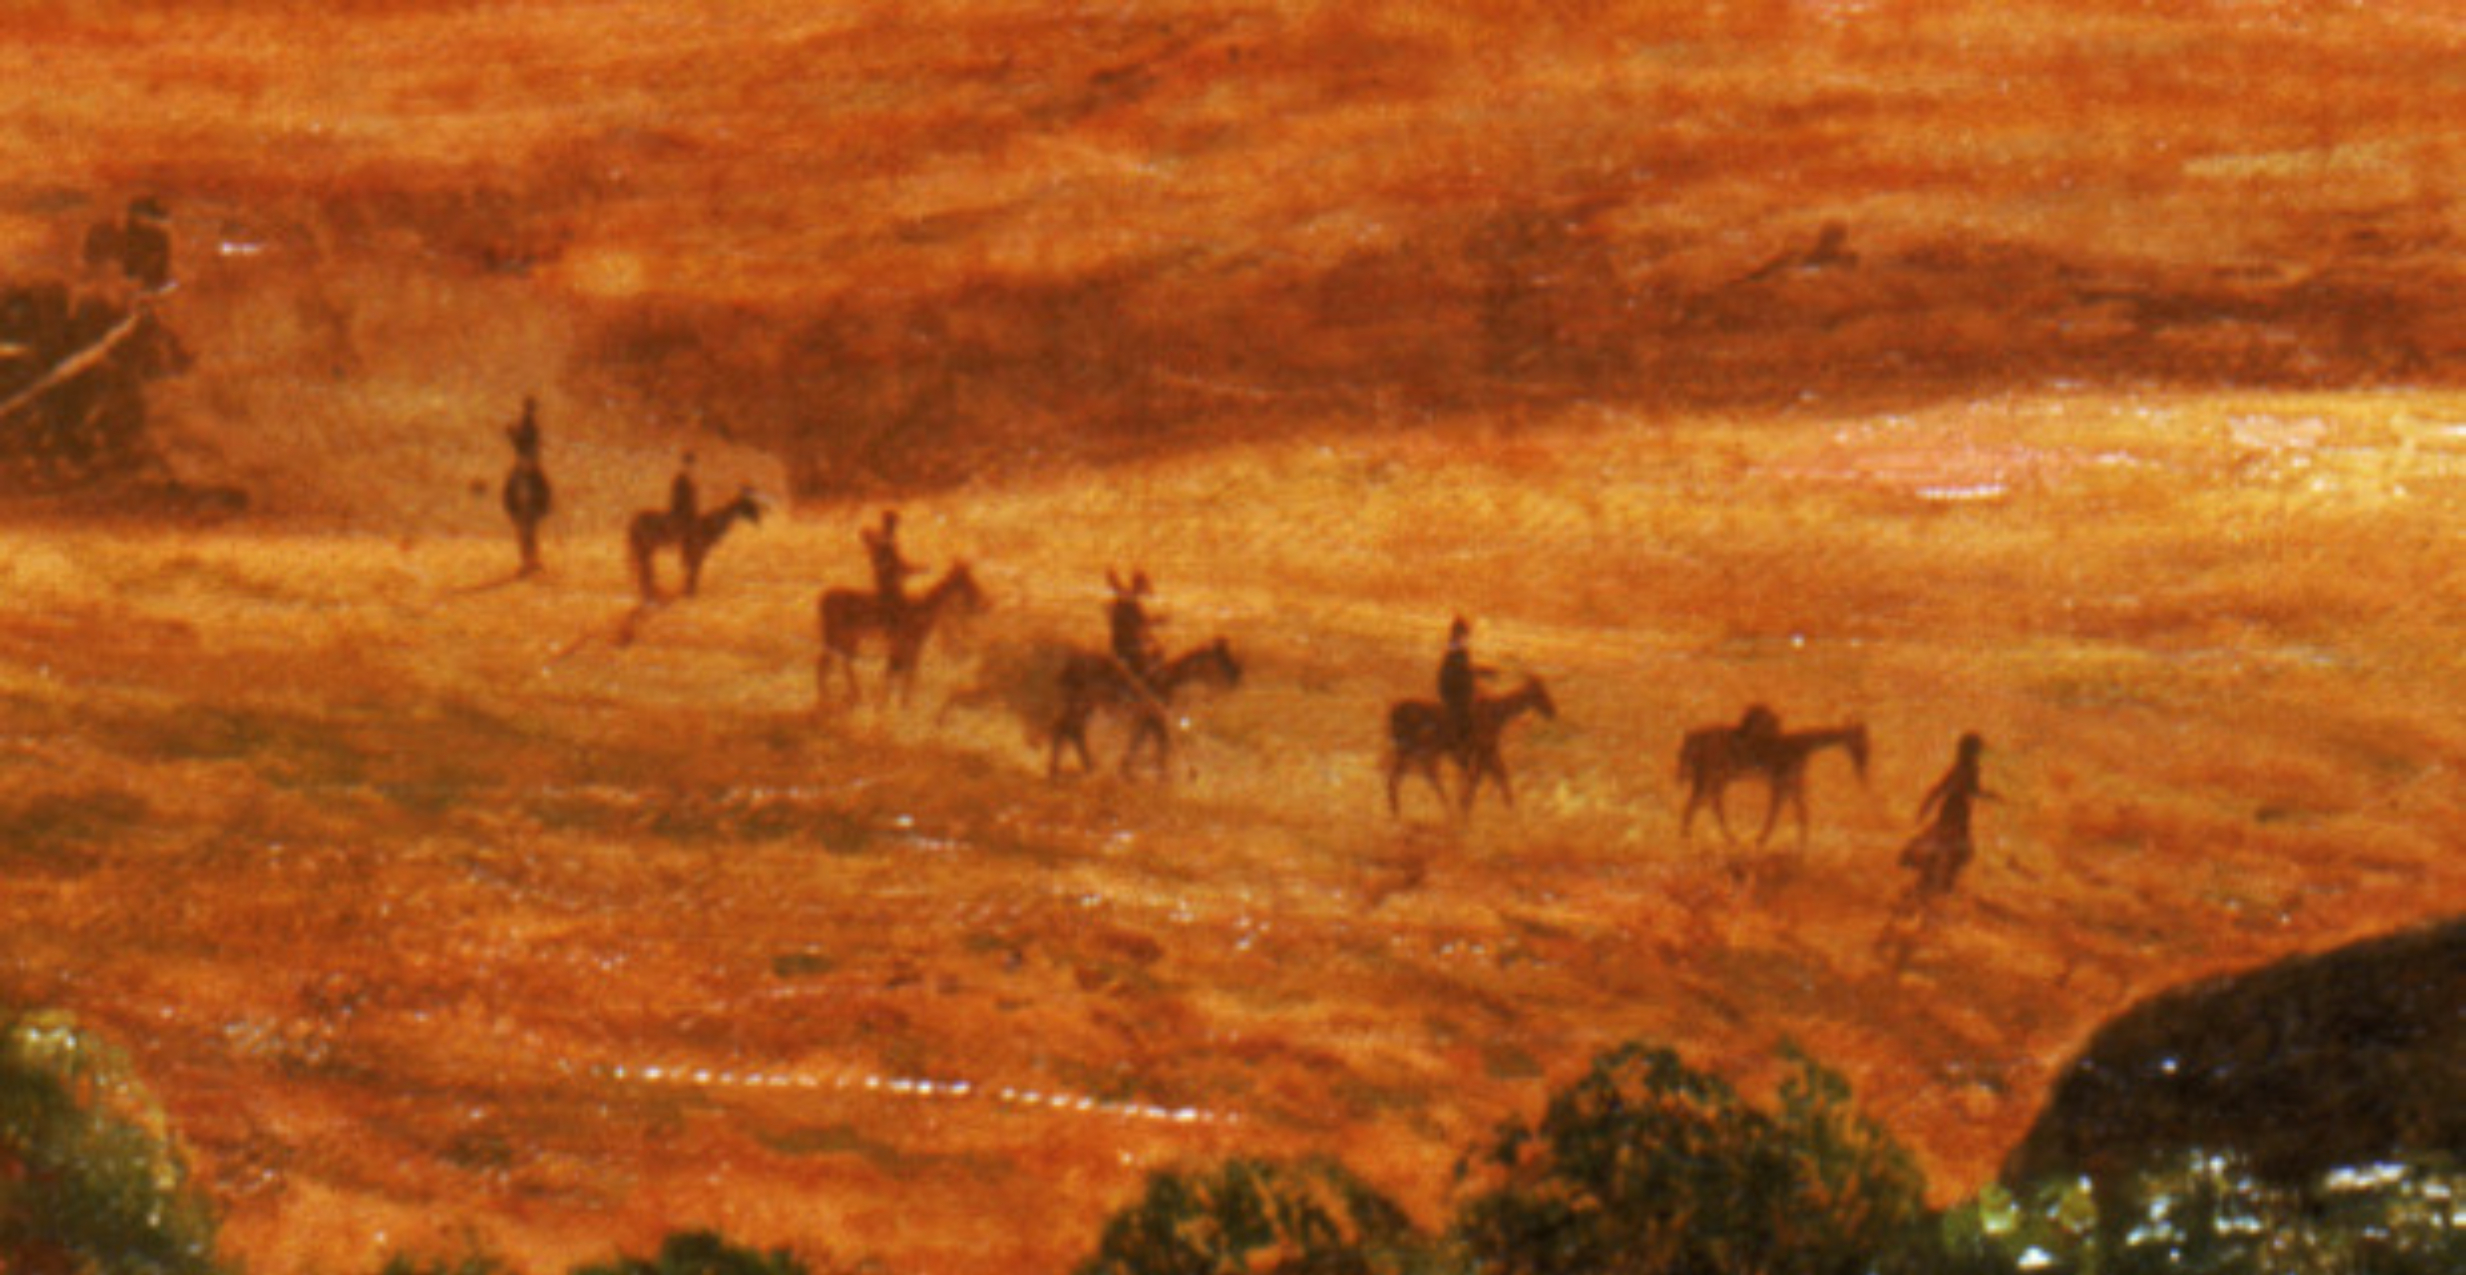 Detail: in a orange-gold valley, a collection of seven people, five on horseback, walk across the landscape in a line.